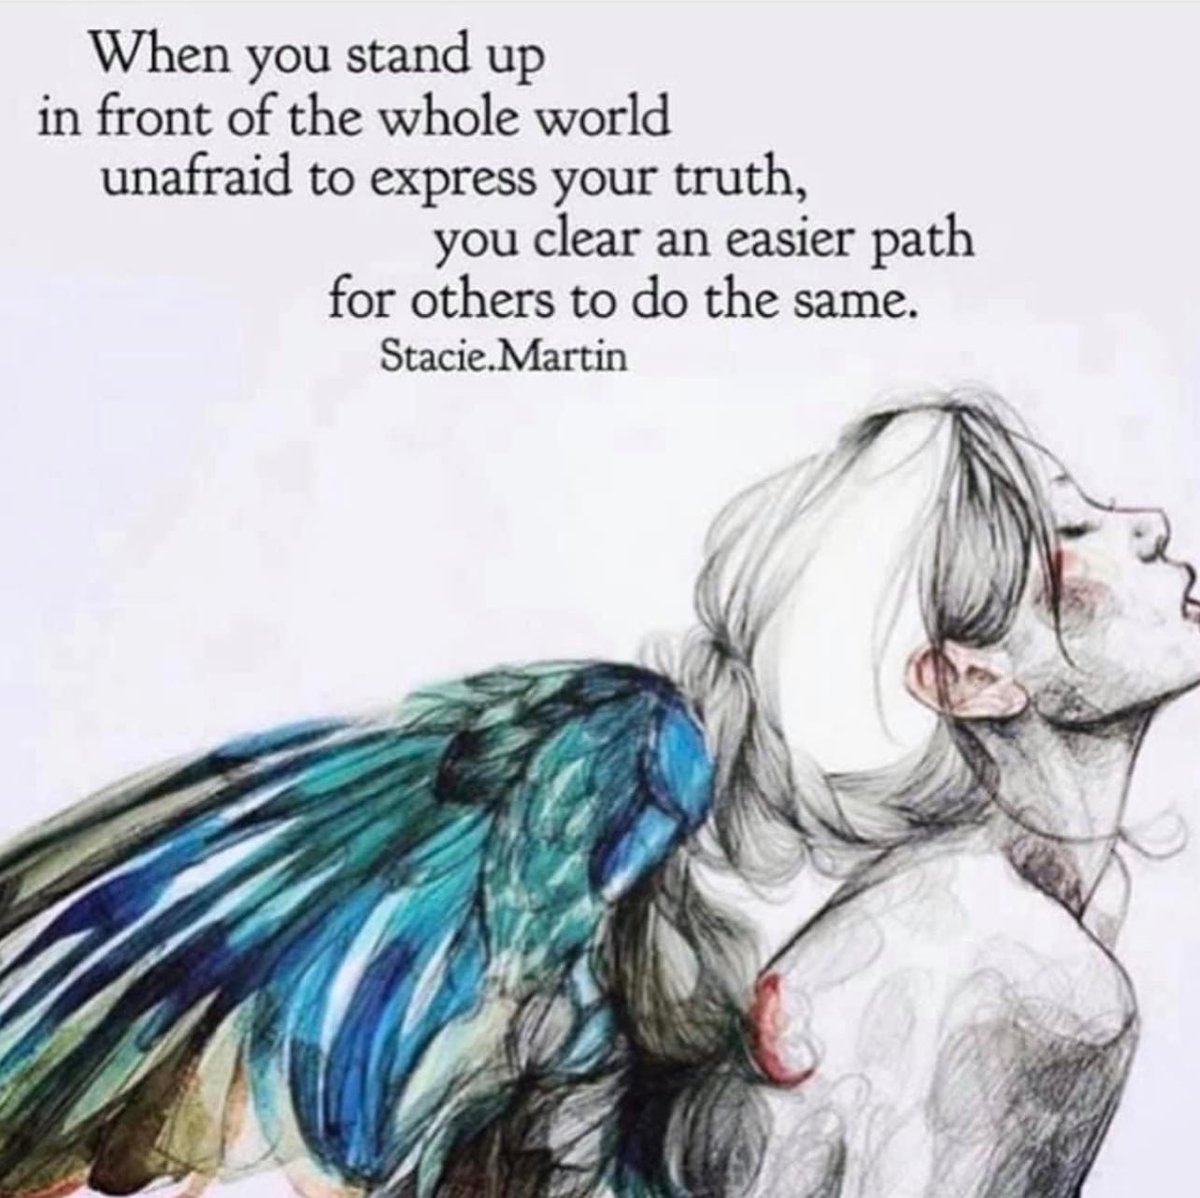 If we all share the profound truth that we all struggle and none of us really have it together. Then our vulnerability exposed enables others to know to they are not alone. Sending love to all souls struggling better days are coming #mentalhealth #compassion